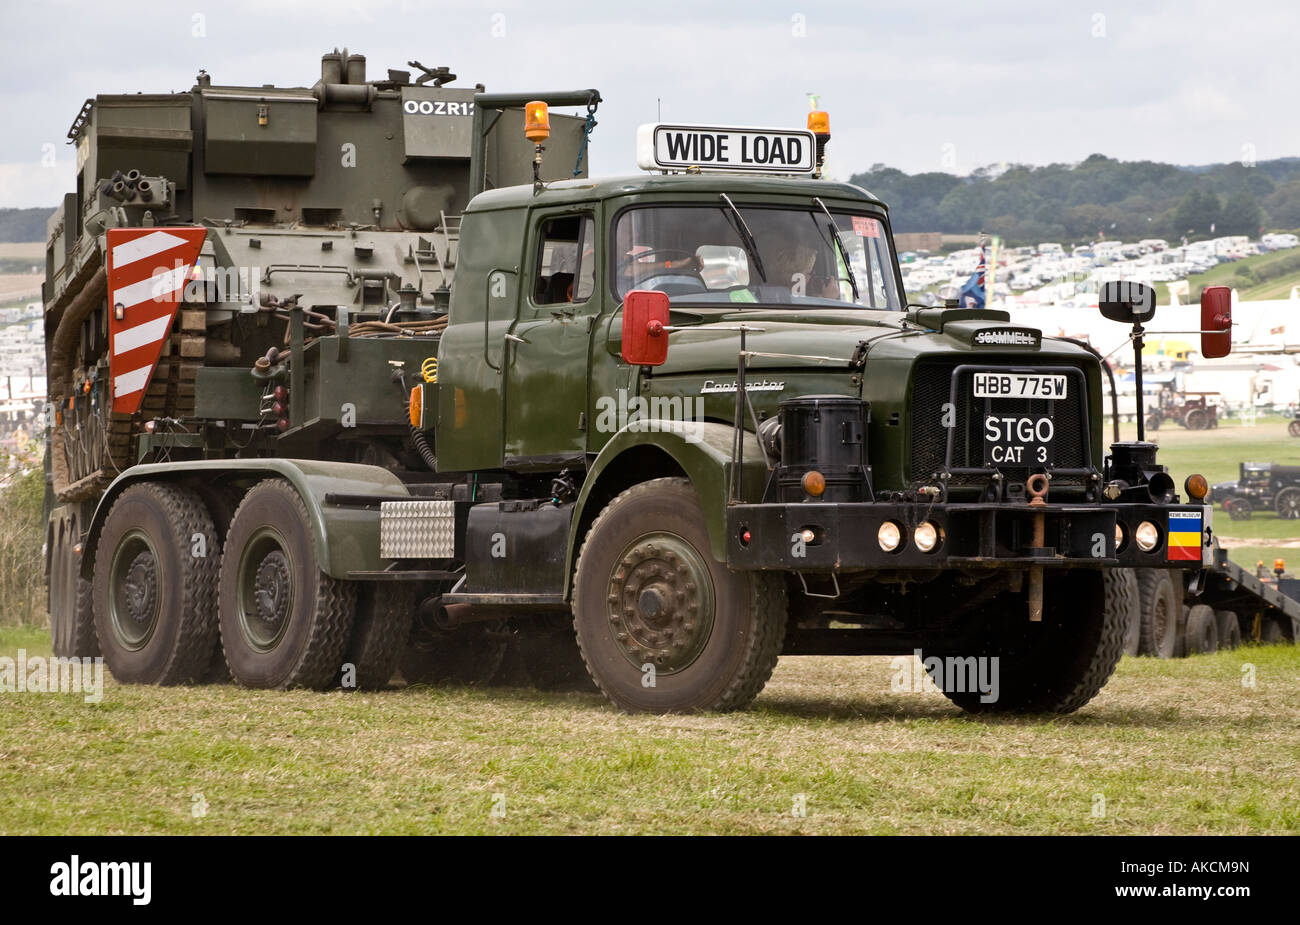 1981 Scammell Contractor Tank Transporter, reg No. HBB 775W, with Centurion tank, at the Great Dorset Steam Fair, England, UK. Stock Photo